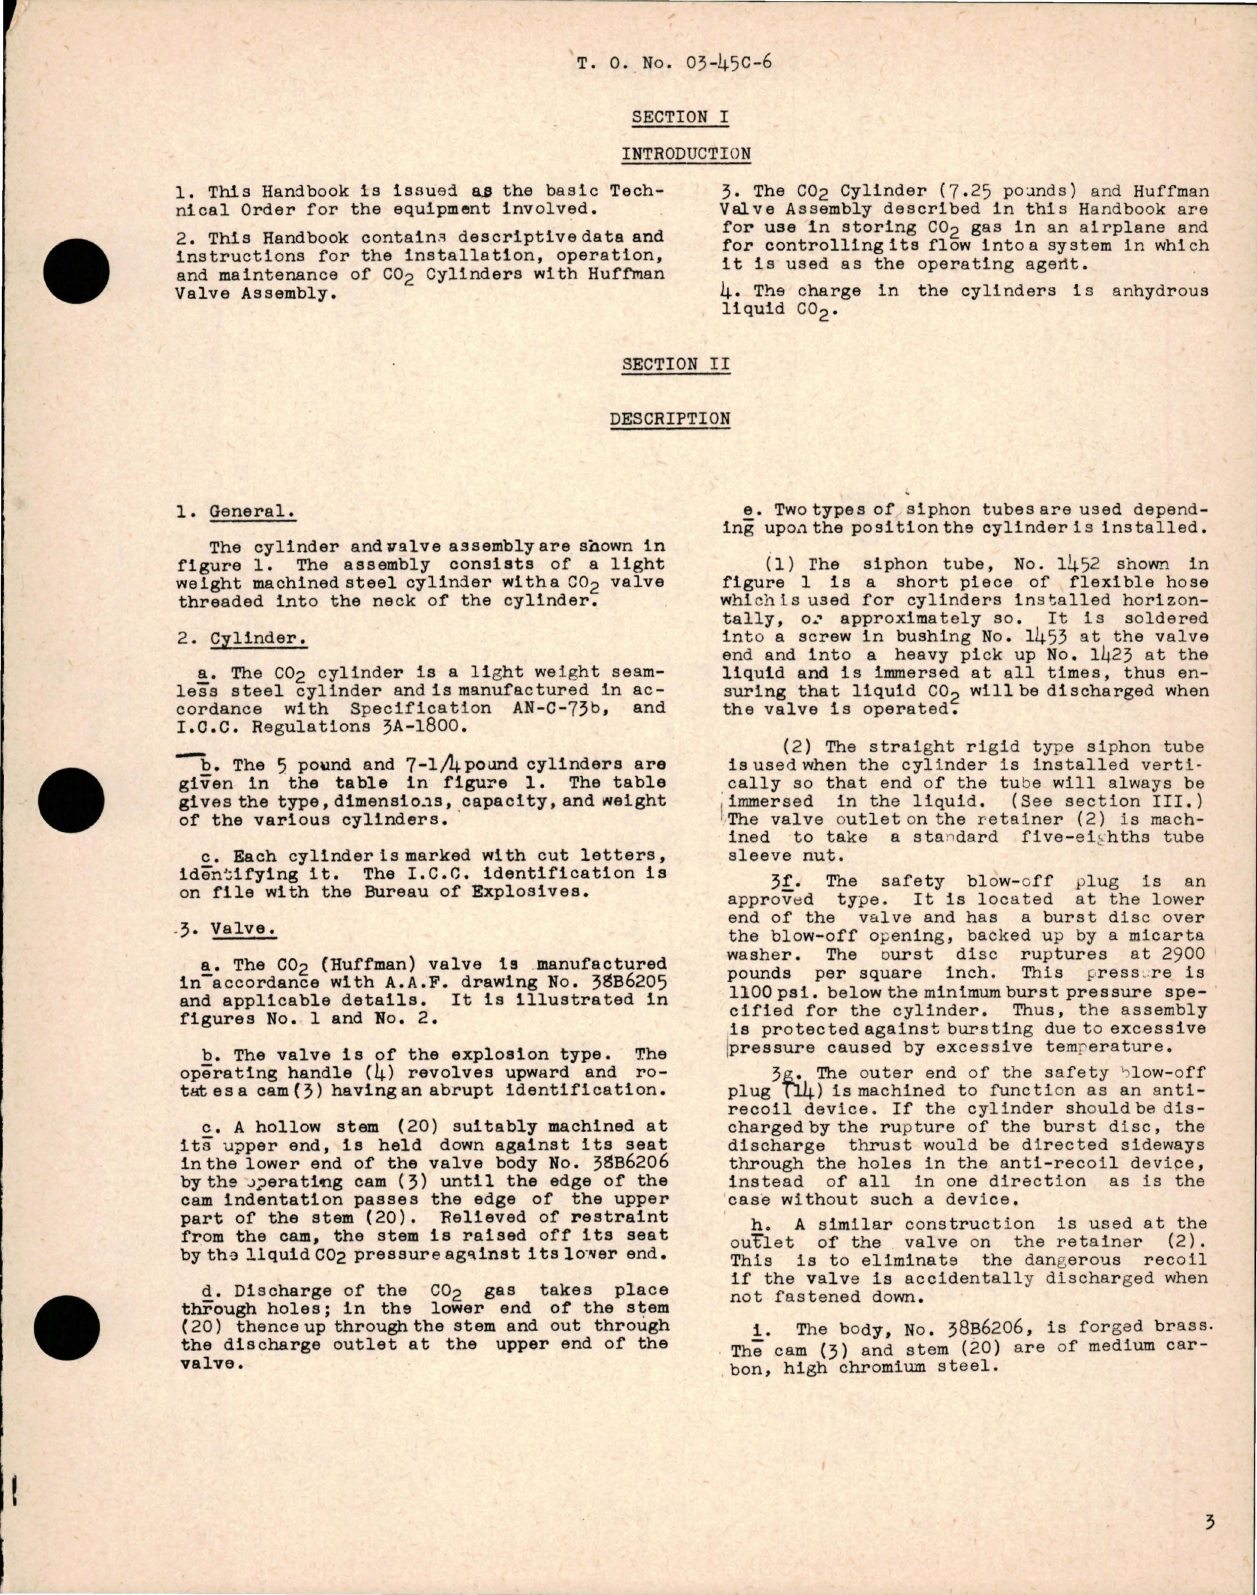 Sample page 5 from AirCorps Library document: Operation, Service and Overhaul Instructions with Parts Catalog for CO2 Cylinder and Valve Assembly